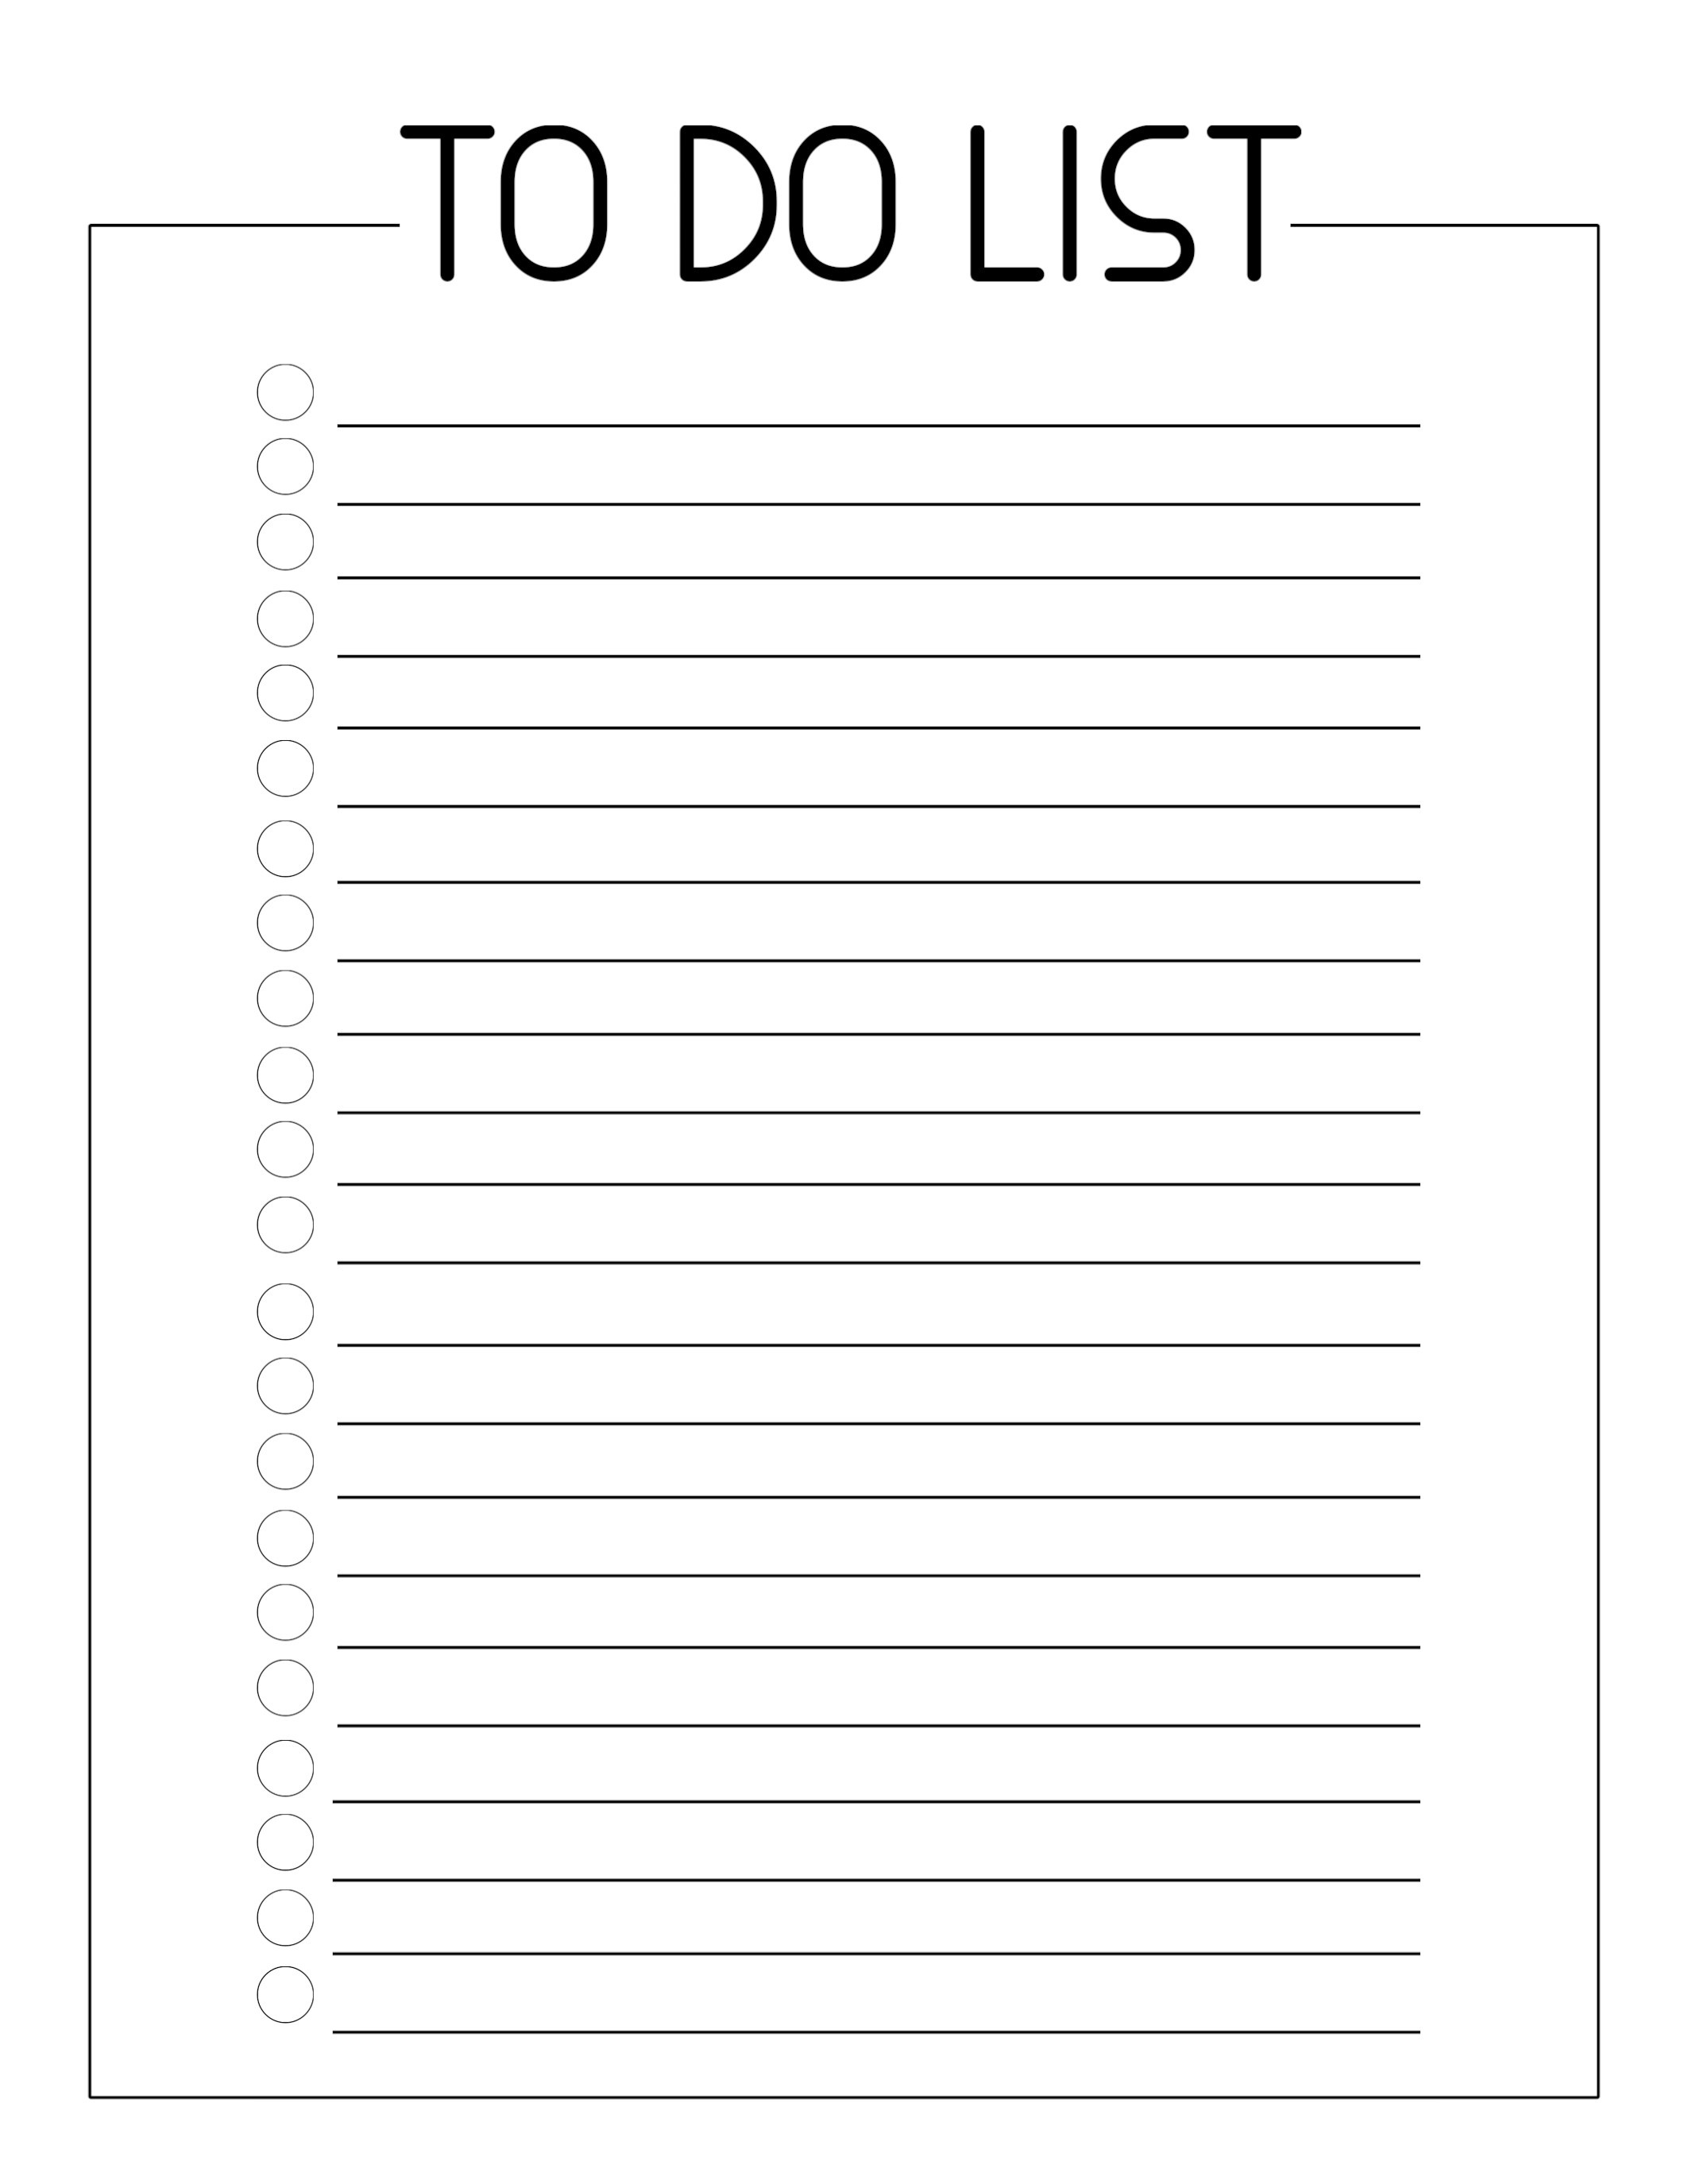 Free Printable To Do Checklist Template - Paper Trail Design - Printable Checklist Template Free